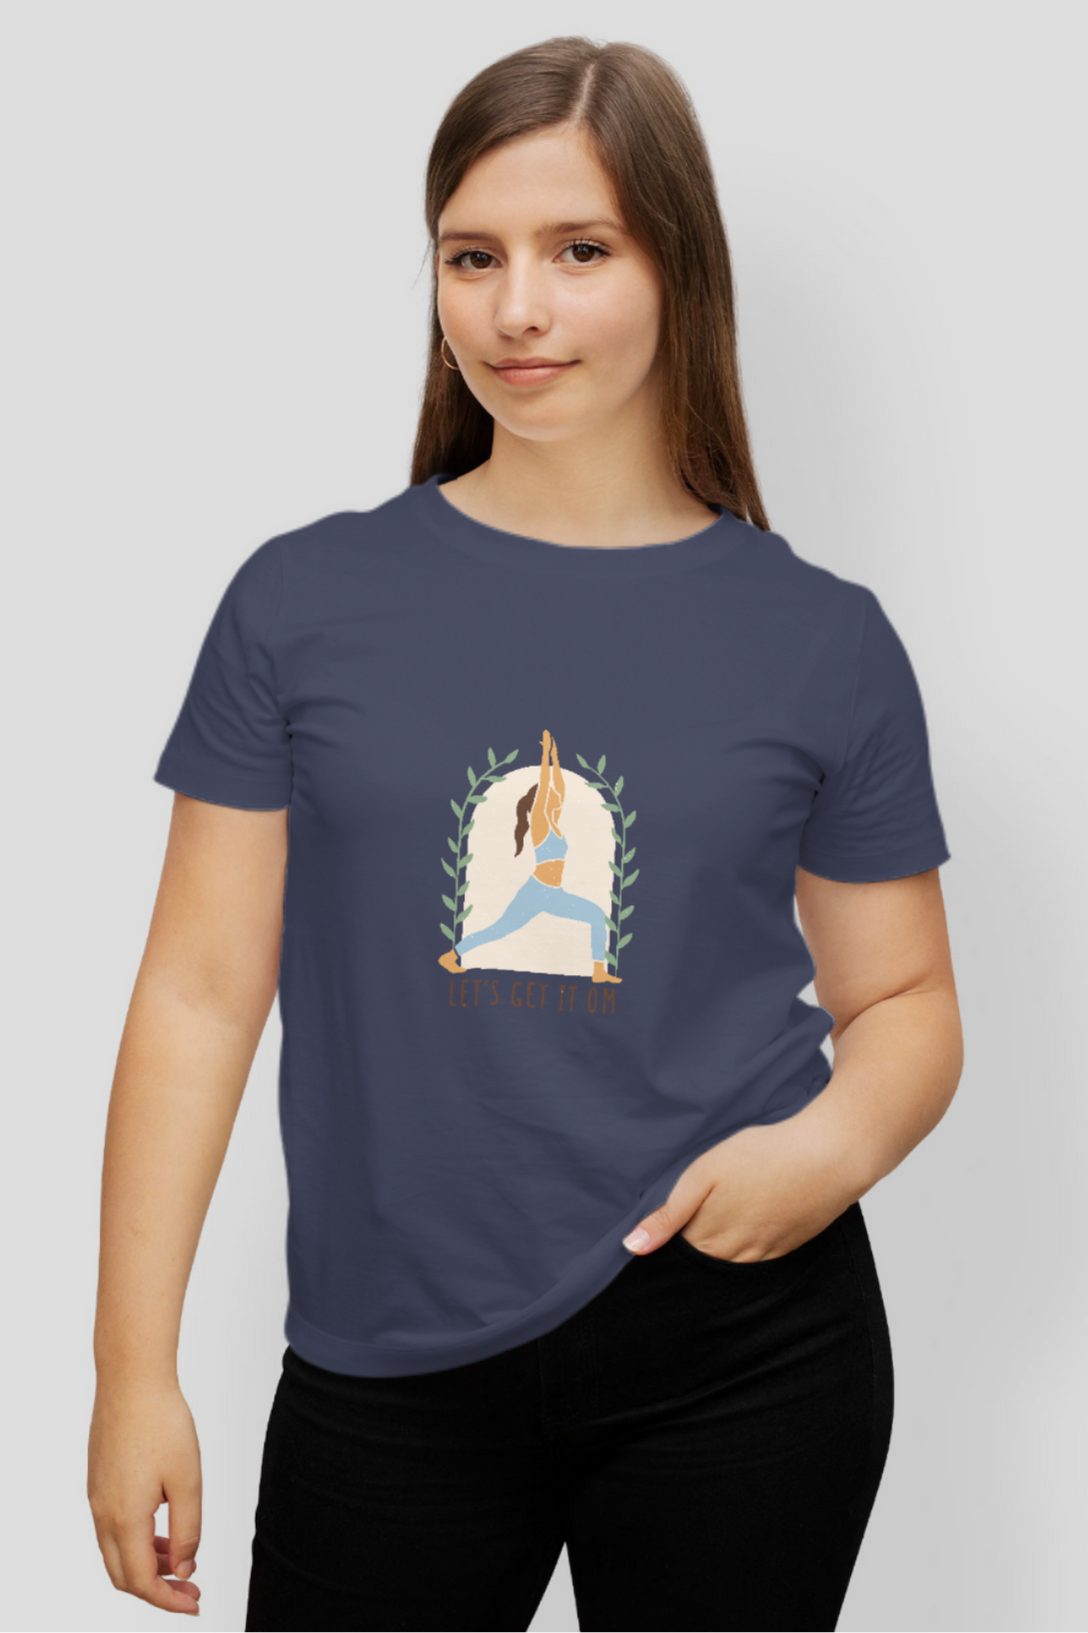 Yoga With Om Printed T-Shirt For Women - WowWaves - 12